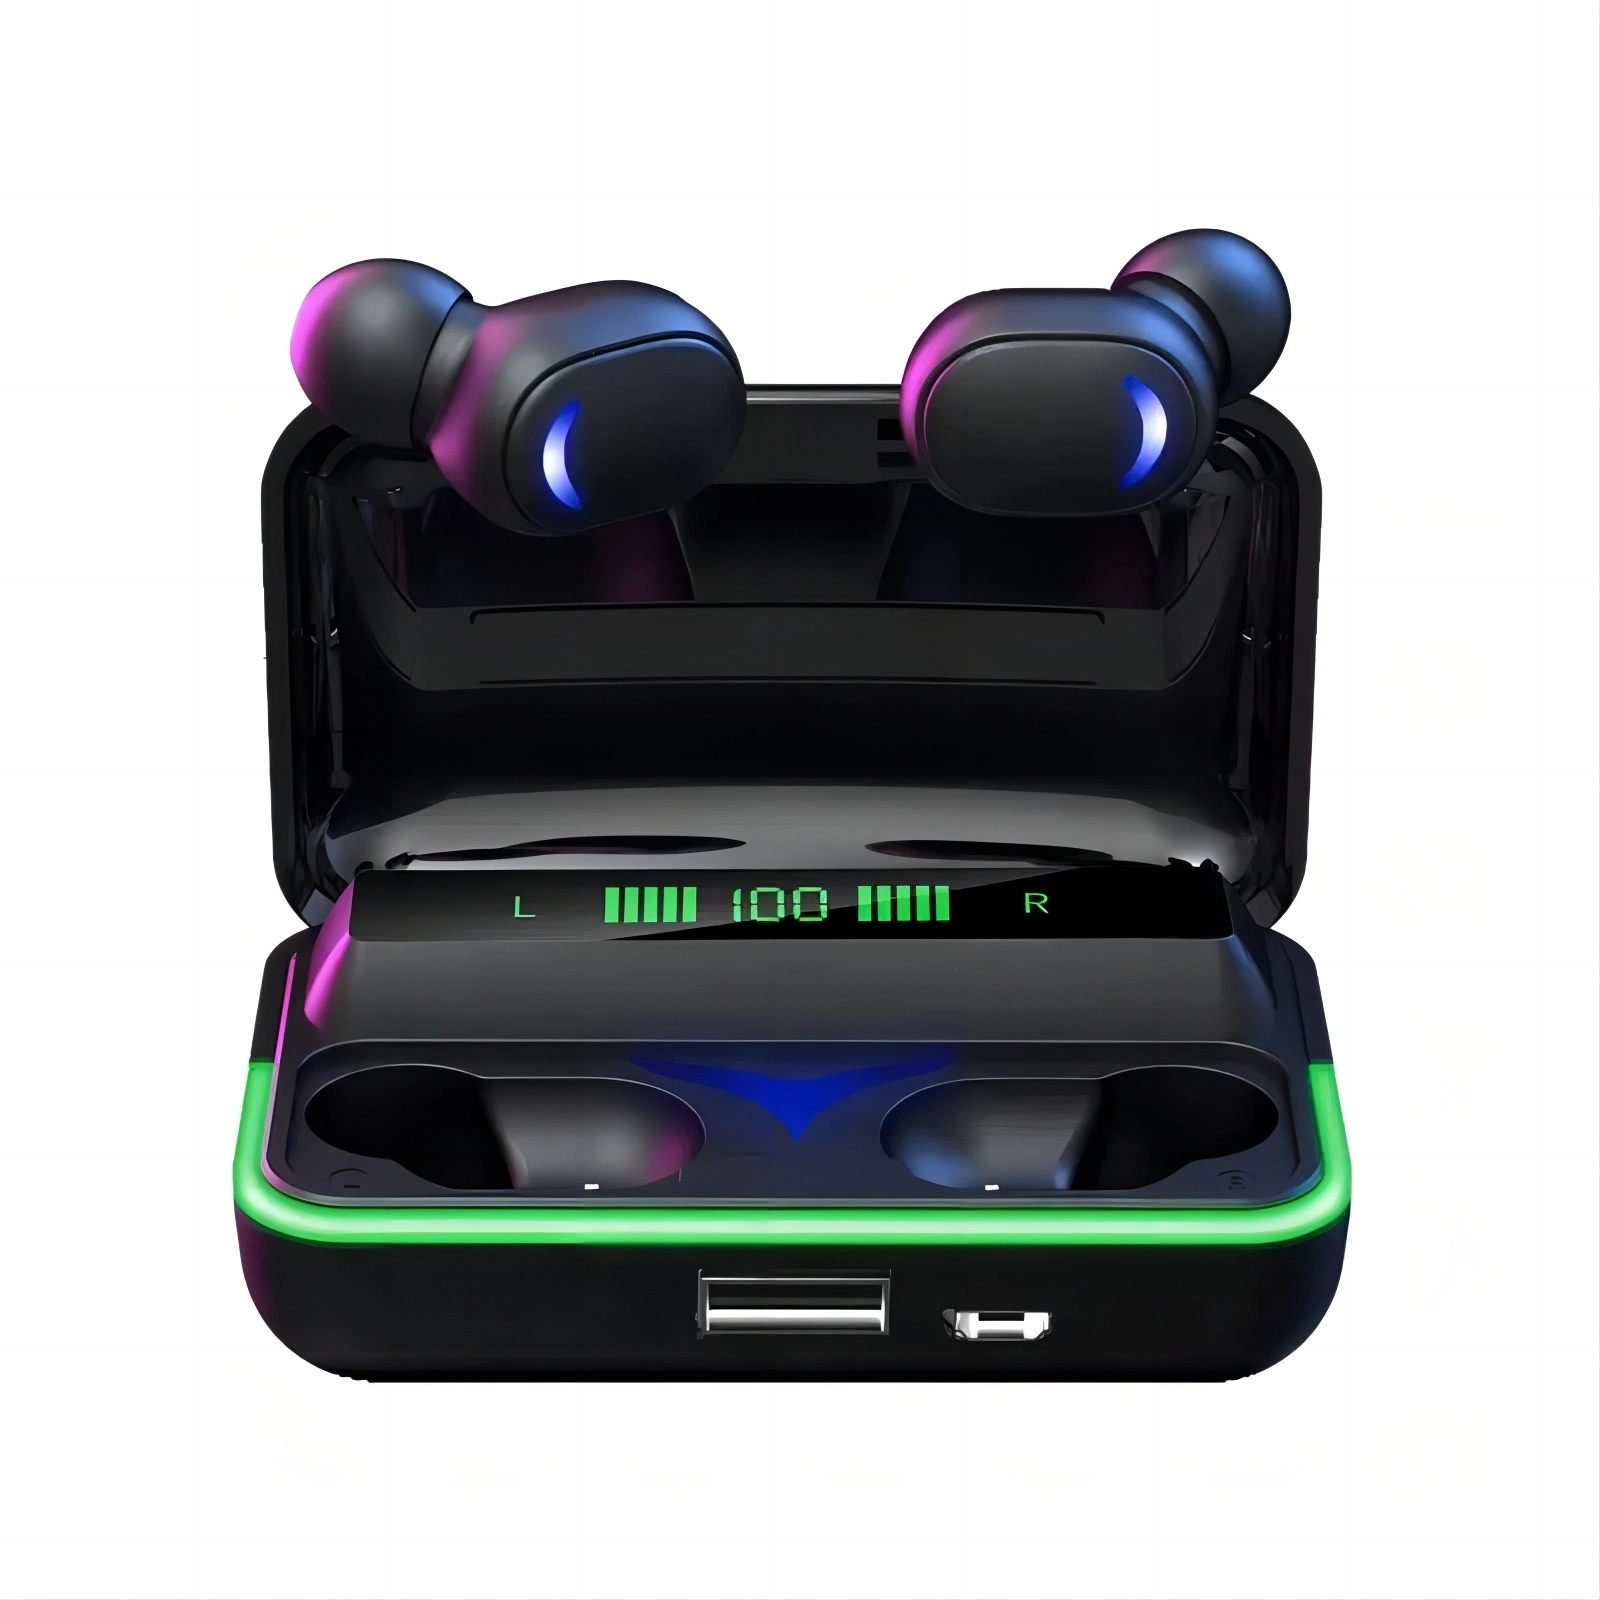 E10 Bt 5.1 Gaming Audifonos Sports Headsets in-Ear Earbuds E10 Tws Wireless Earphones with Charging Box